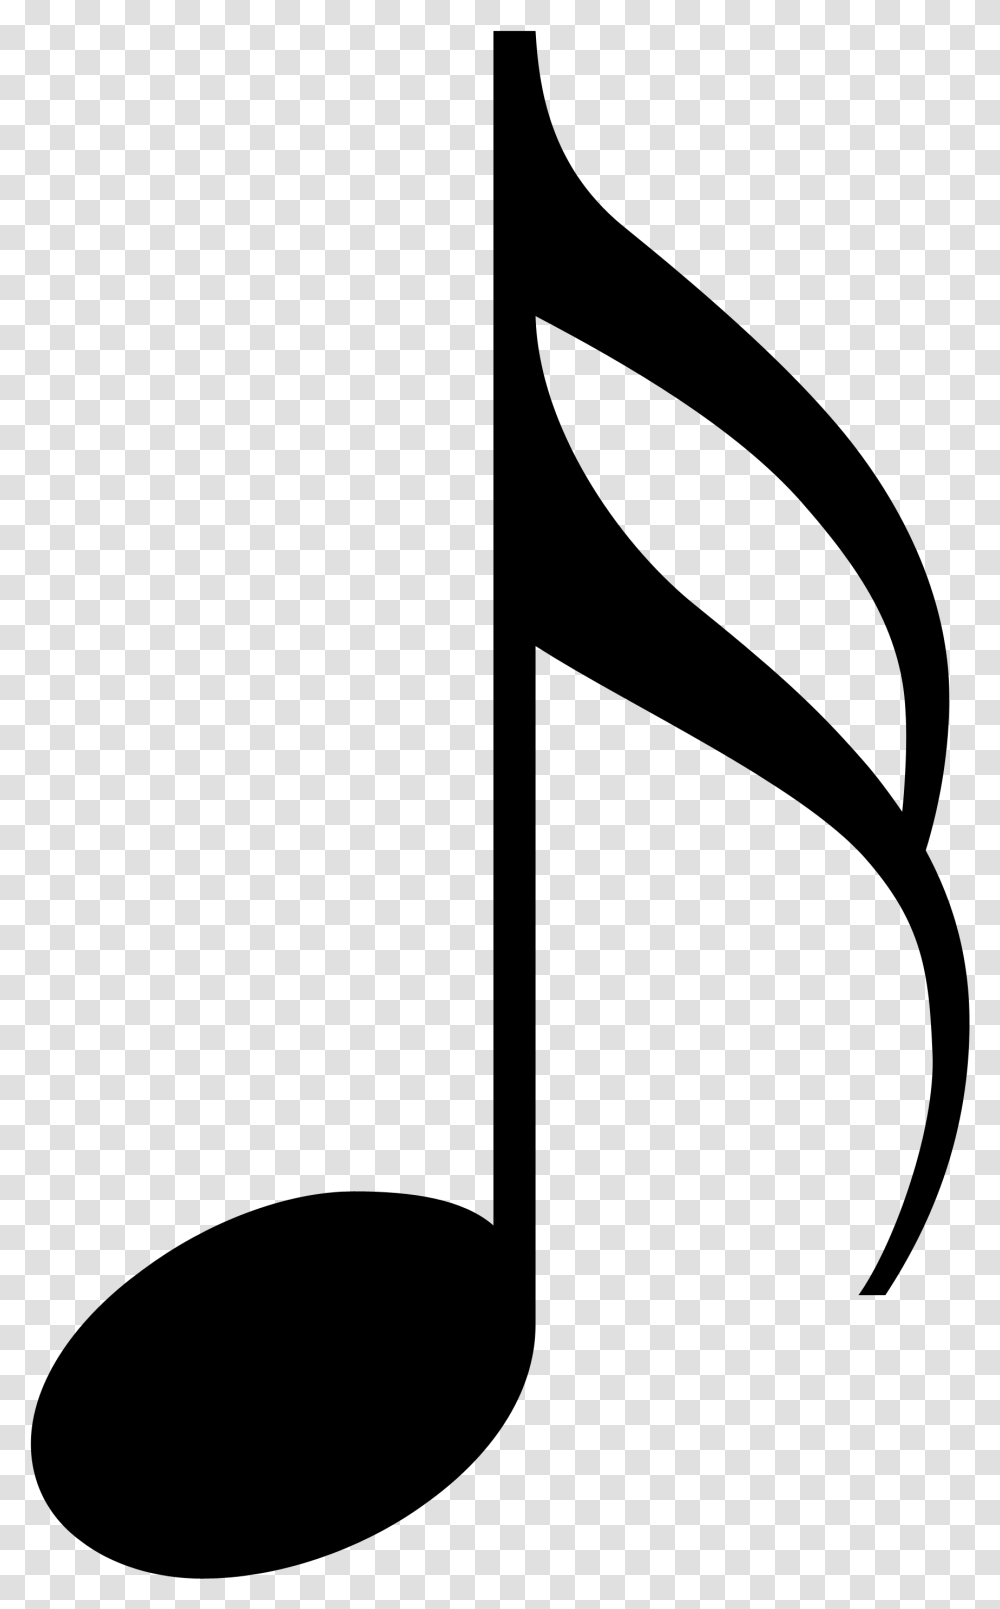 Sixteenth Note Musical Note Quarter Note Eighth Note Sixteenth Note, Gray Transparent Png